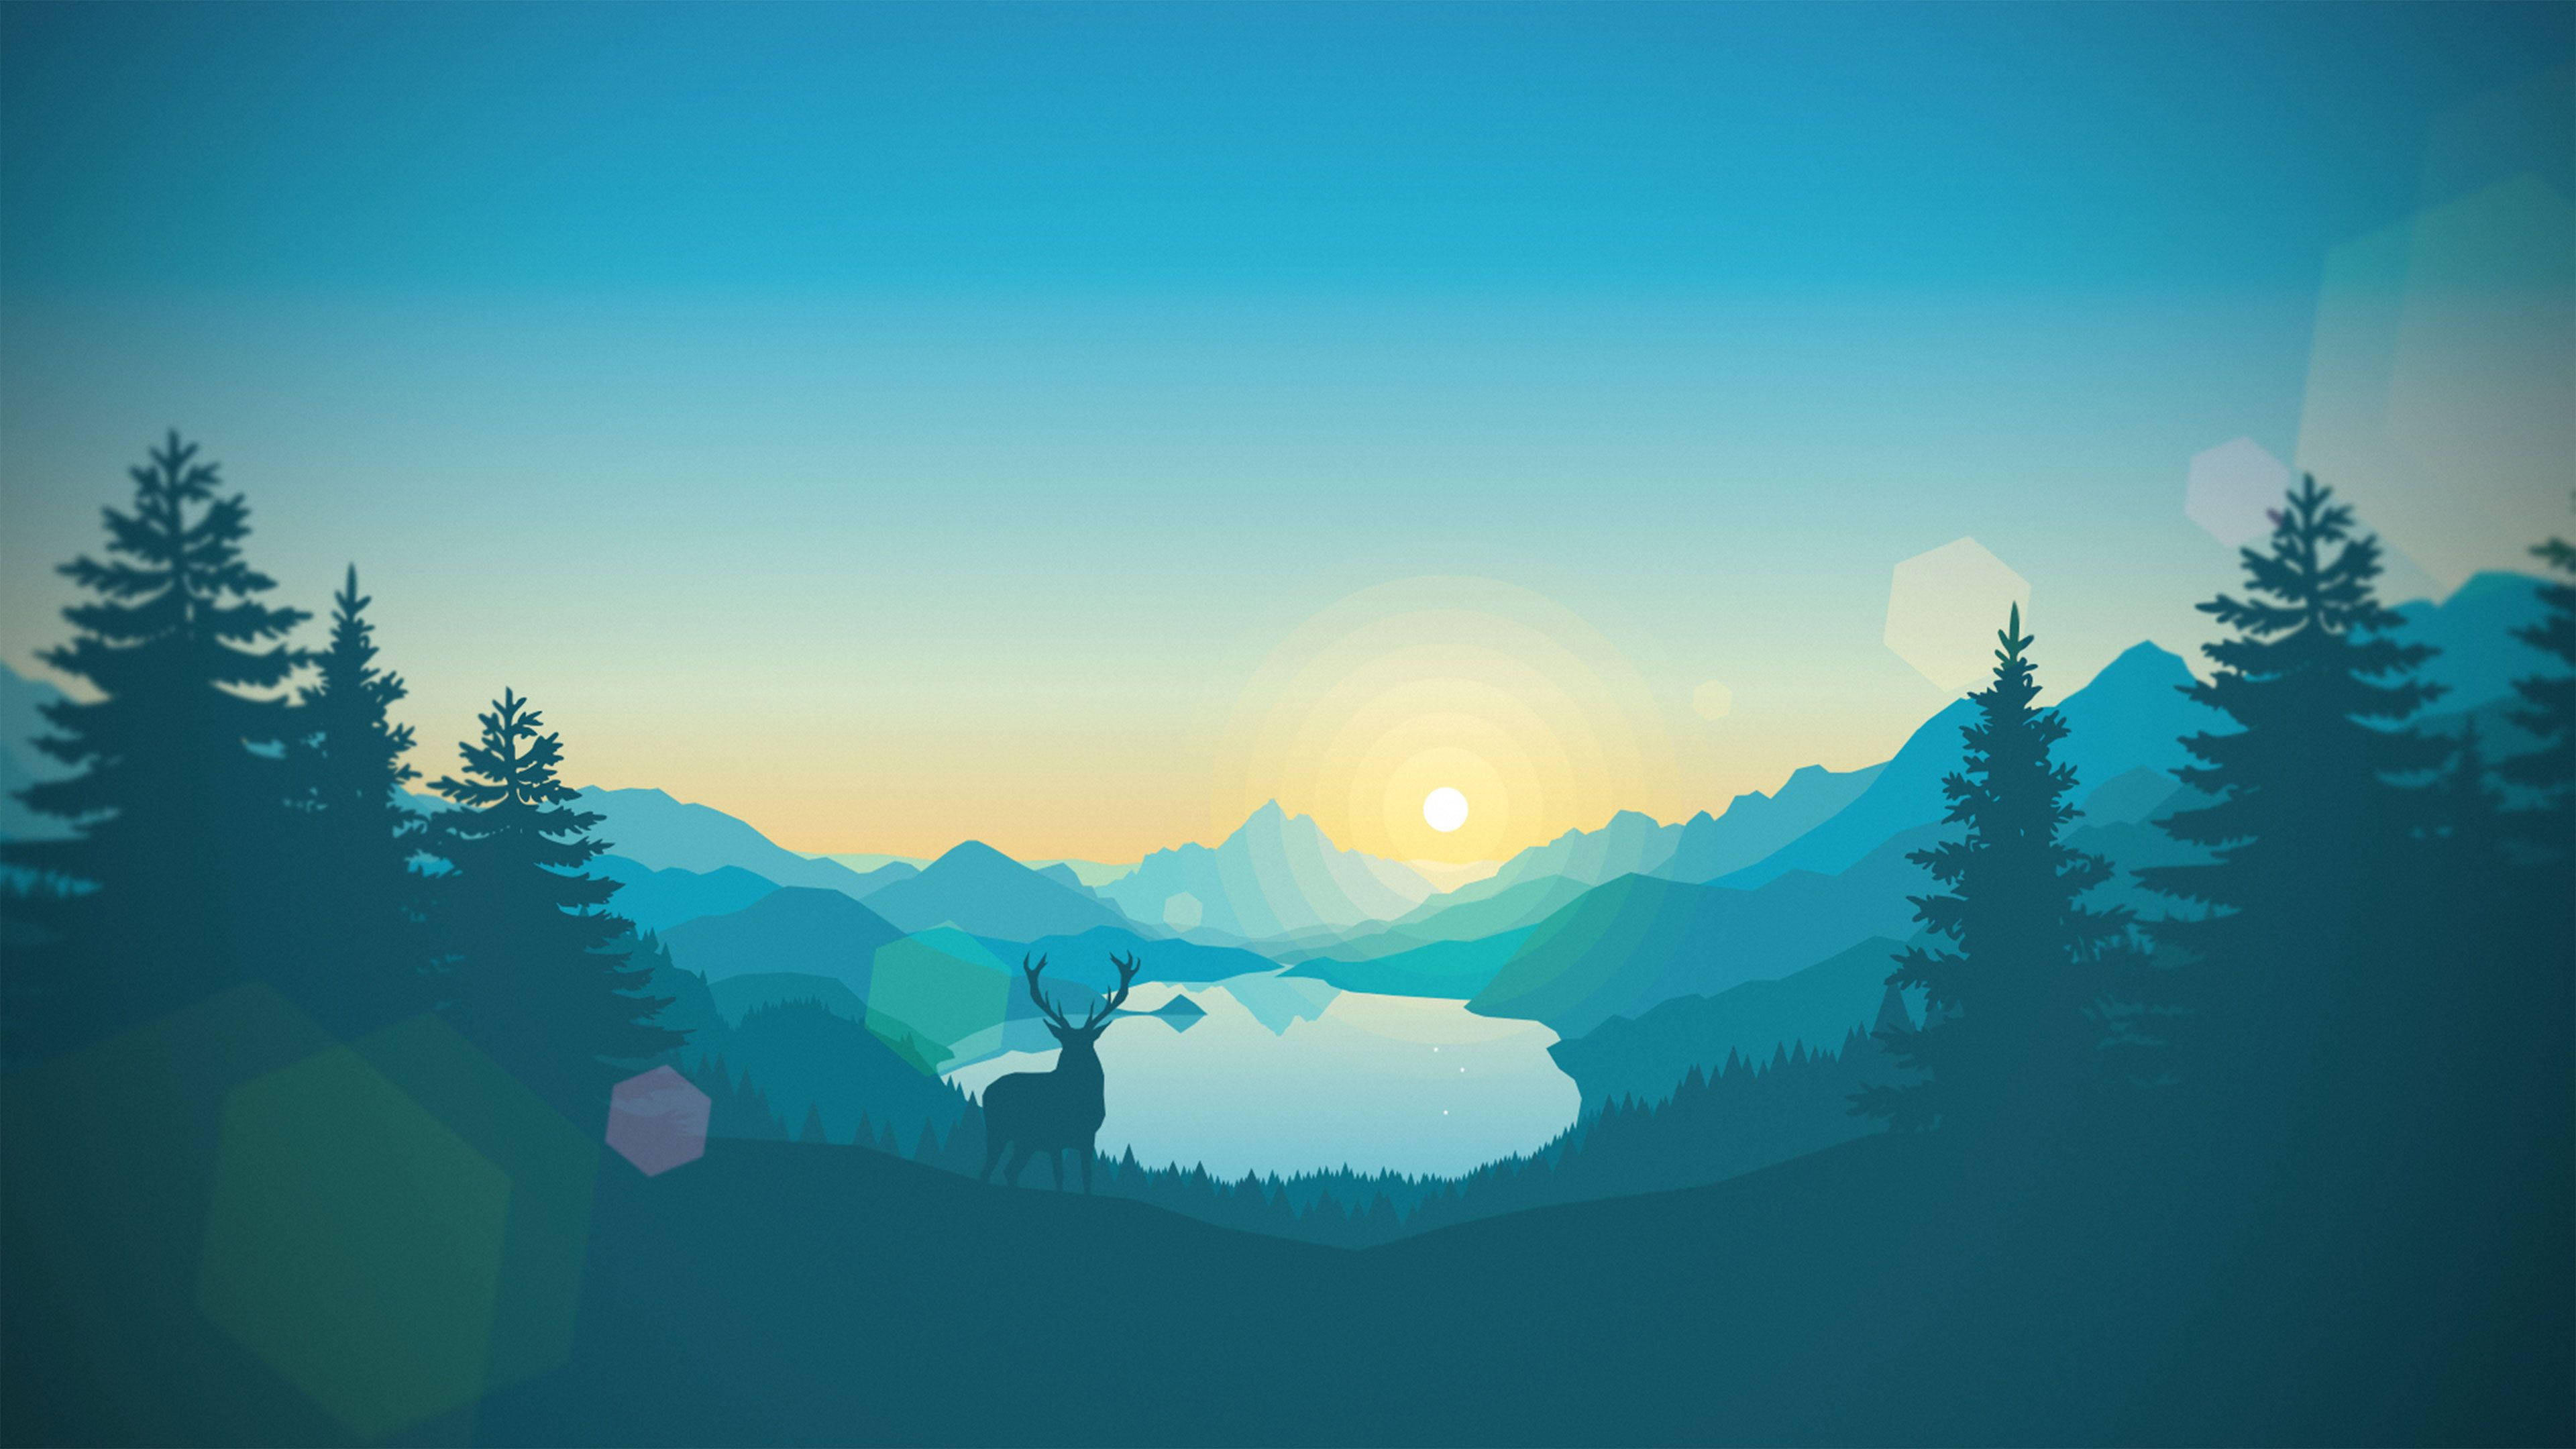 A Captivating Silhouette Of A Deer In A 4k, Blue Minimalist Landscape Background